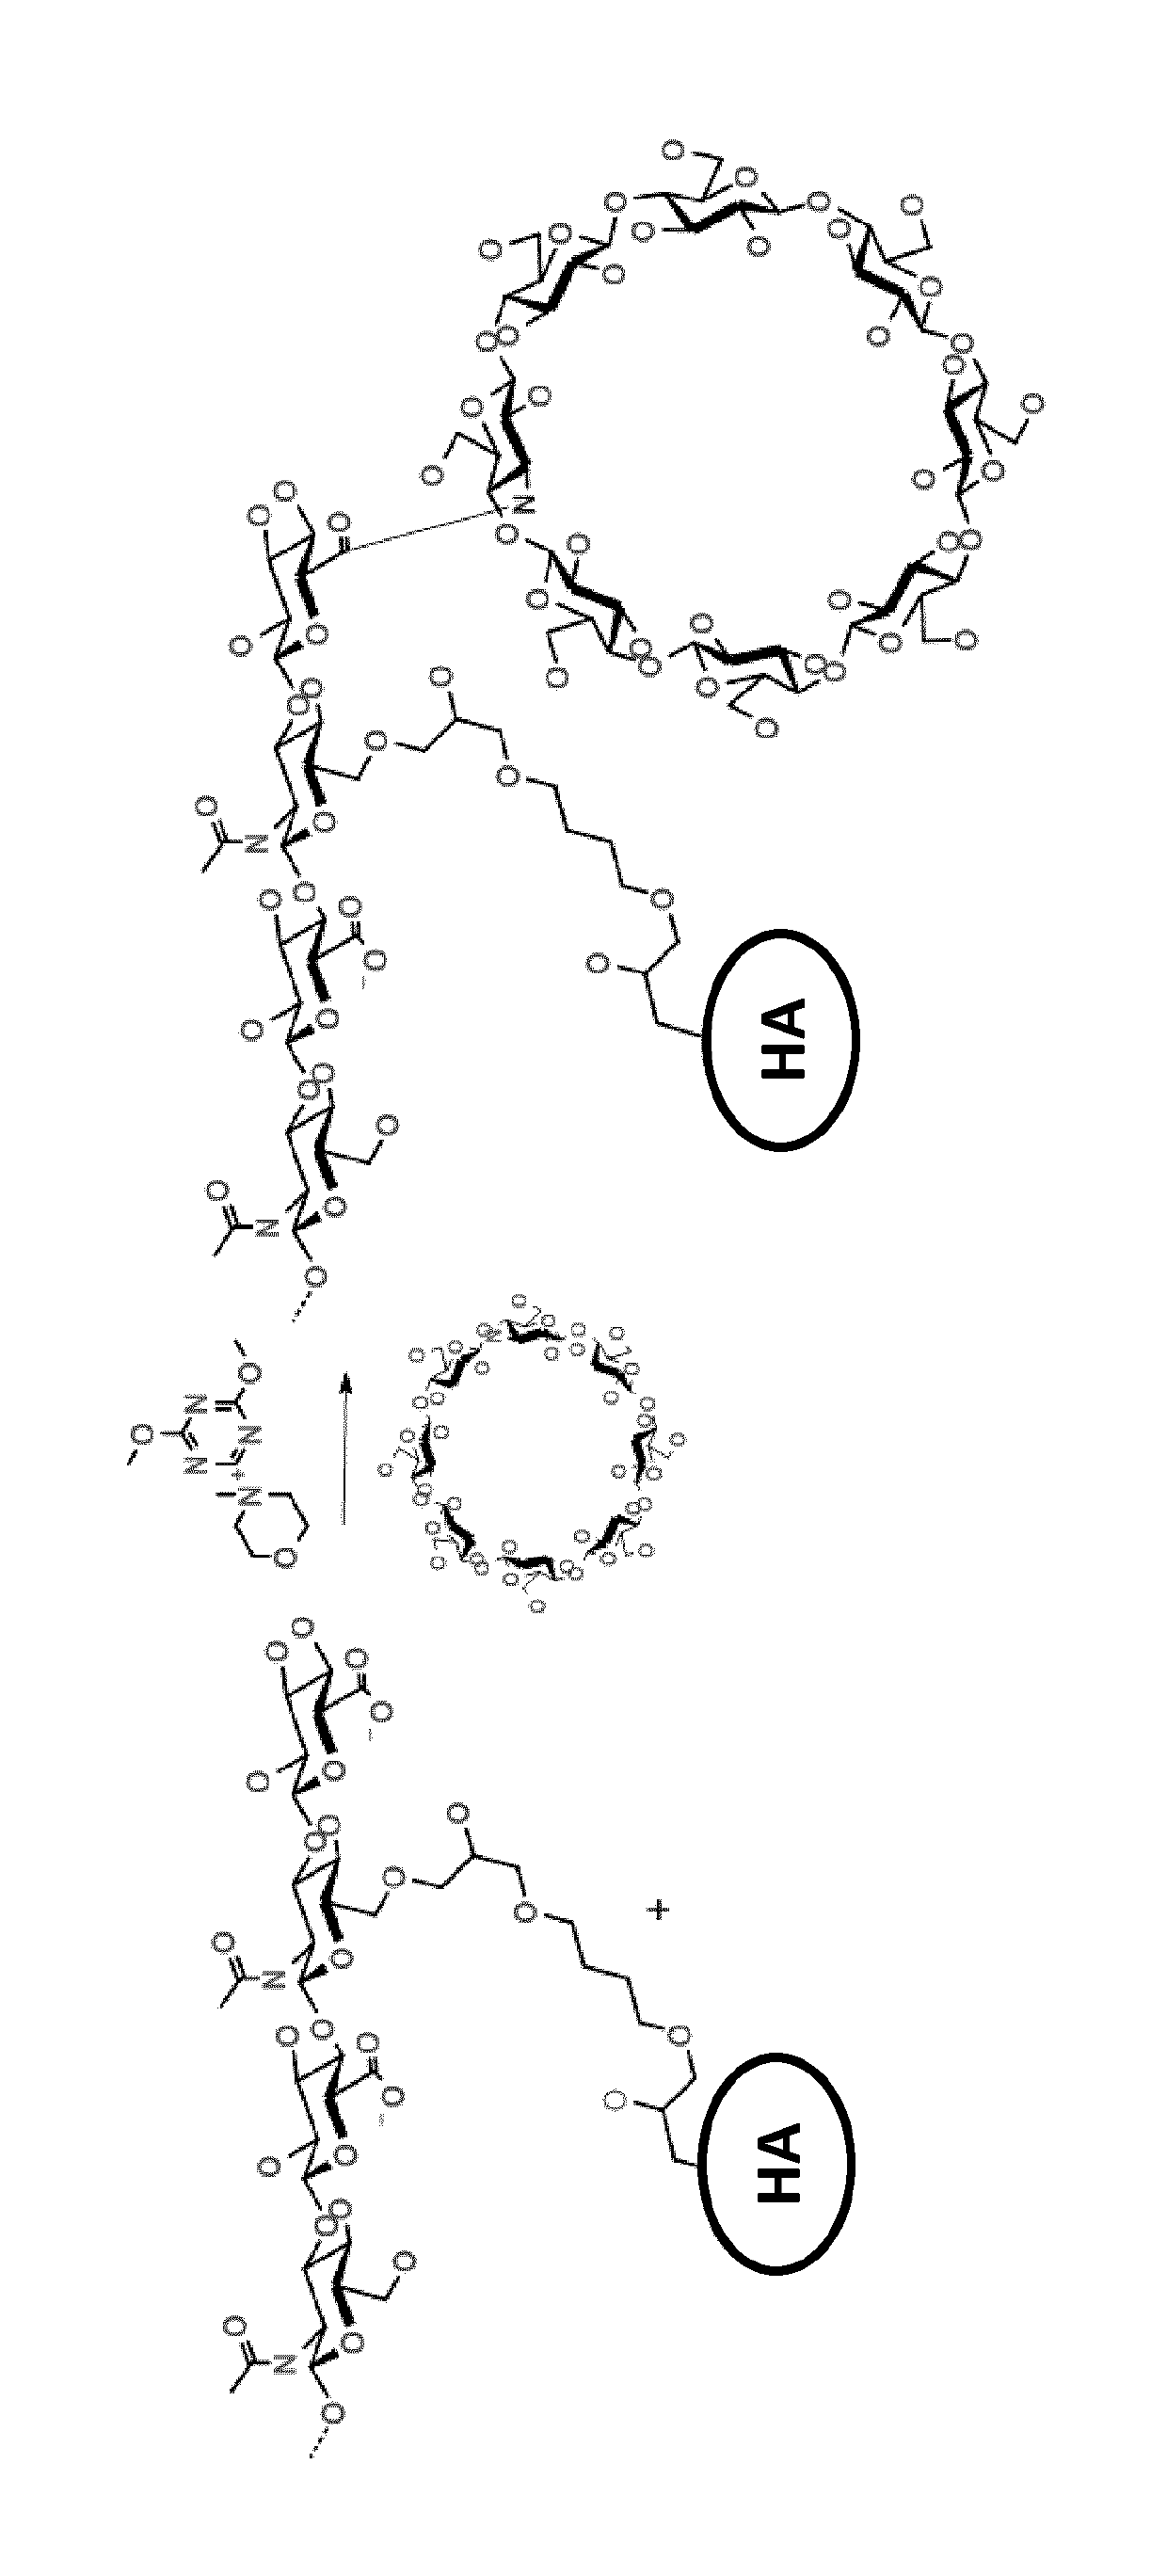 Grafting of cyclodextrin by amide bonds to an ether cross-linked hyaluronic acid and uses thereof